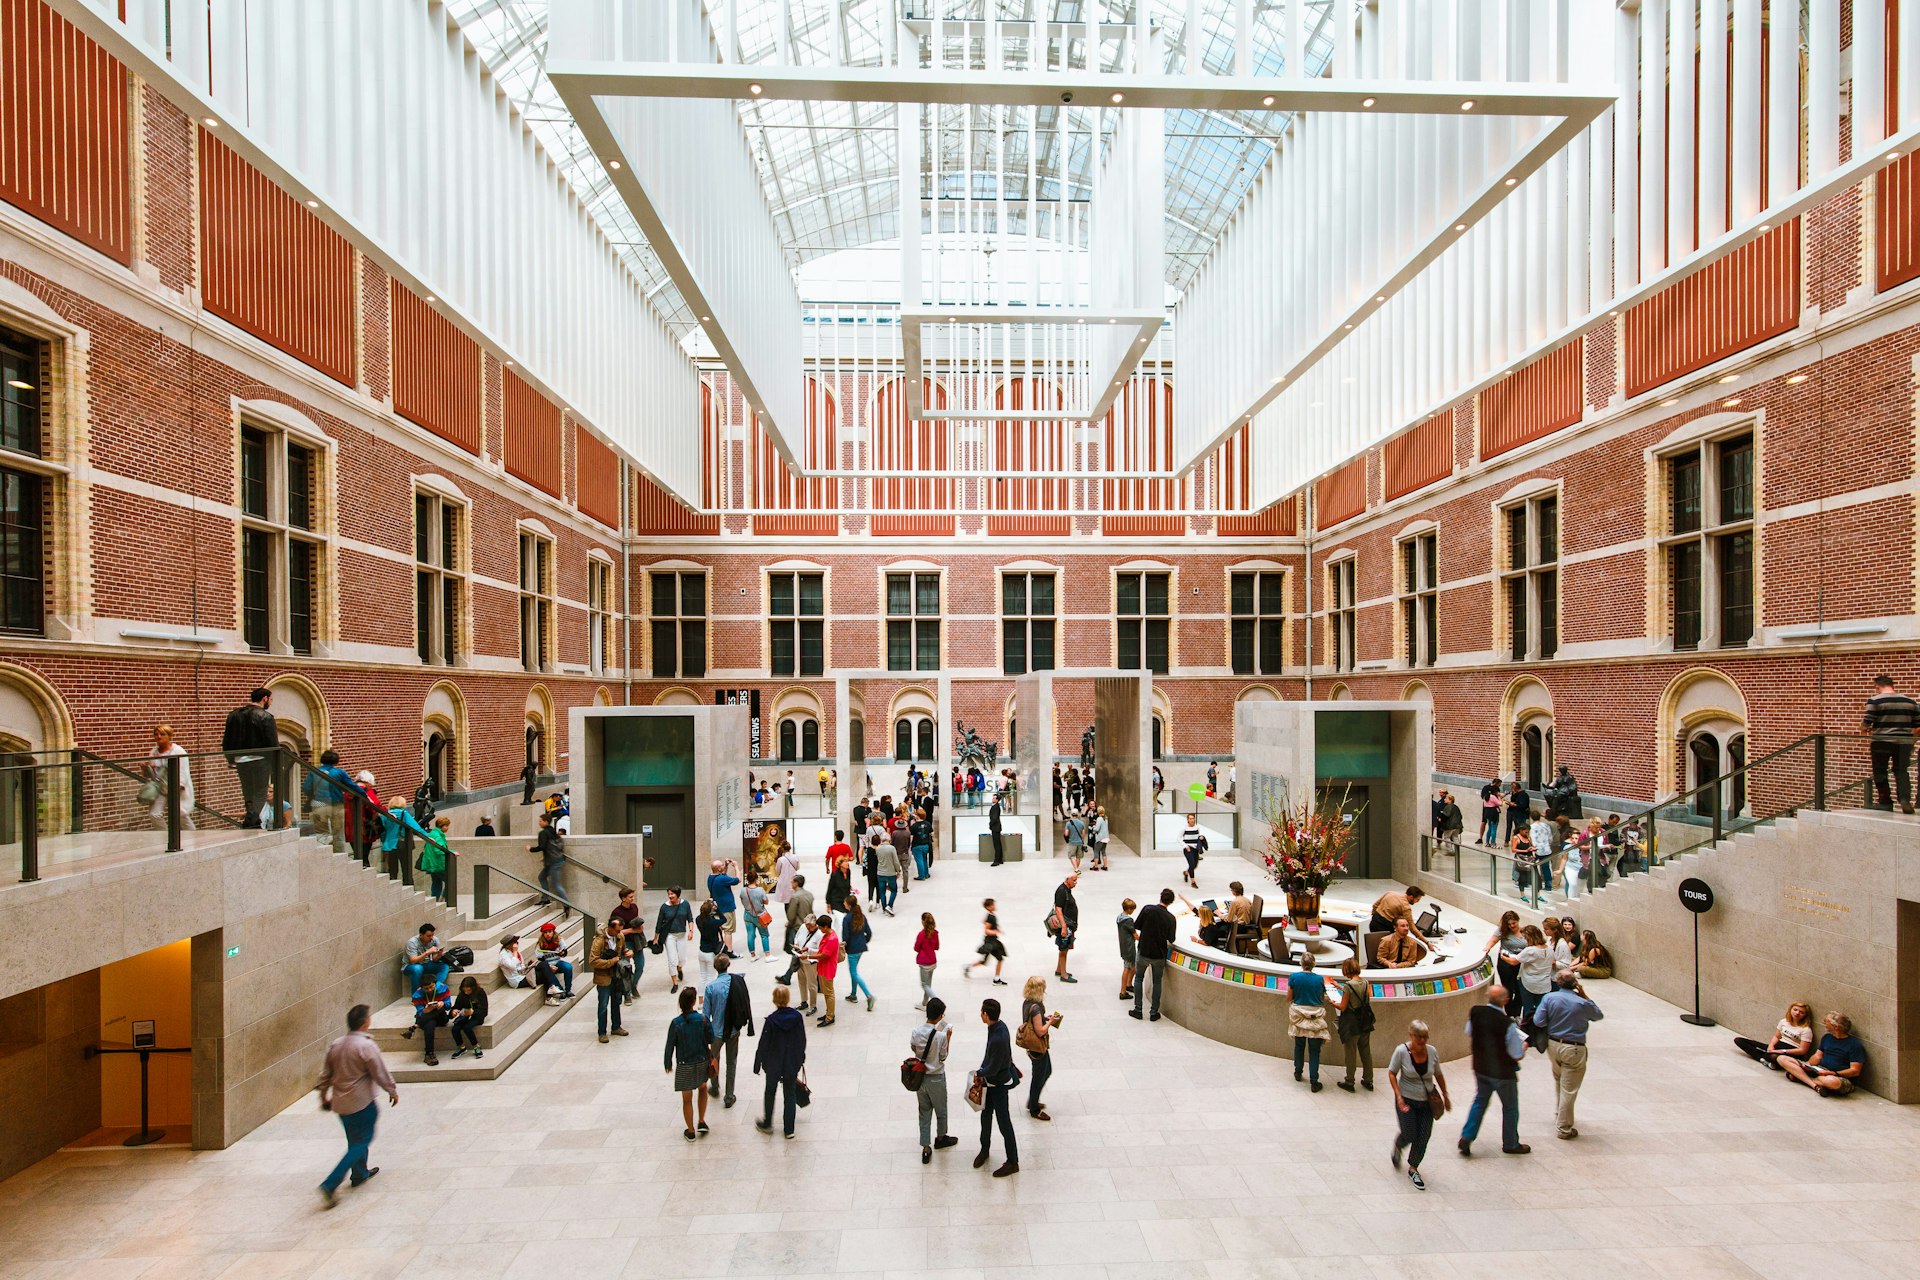 Visitors in modern main hall in the new atrium of the Rijksmuseum. Entrance to museum, massive ceiling decorations and people in dutch national museum.